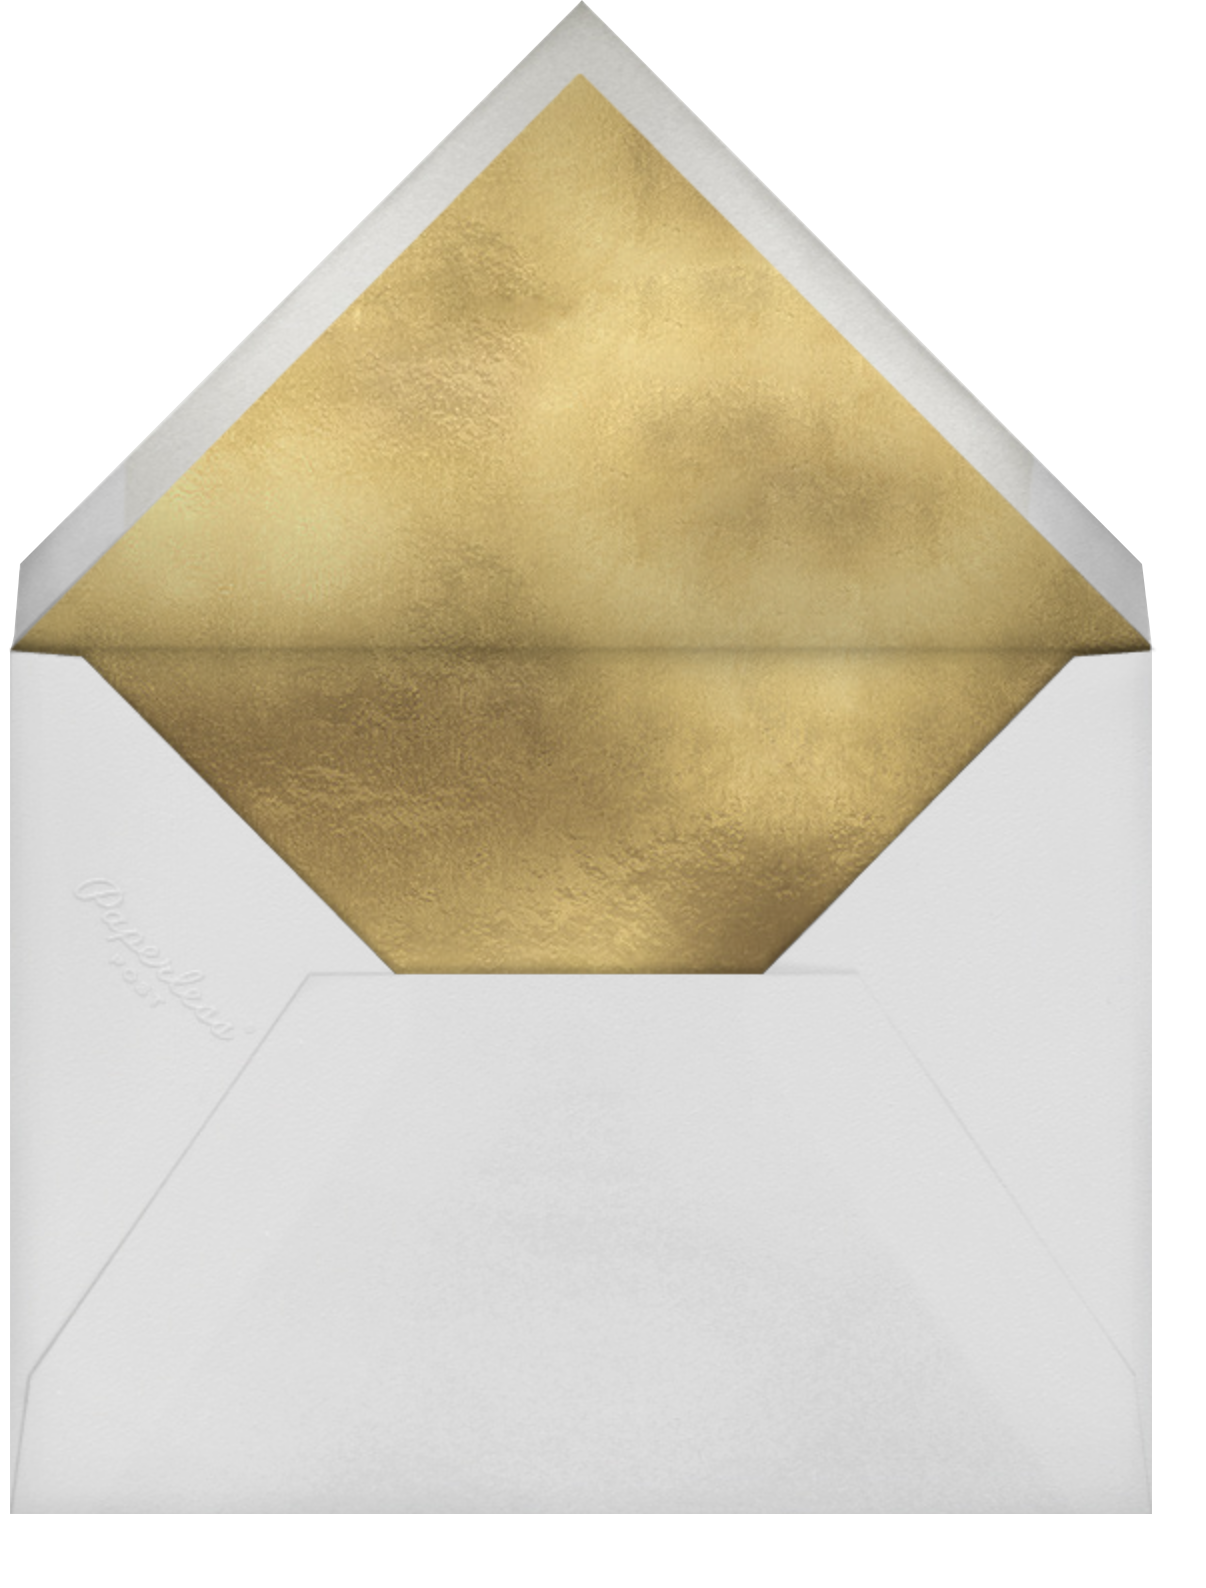 Greatest Dad - Rifle Paper Co. - Envelope